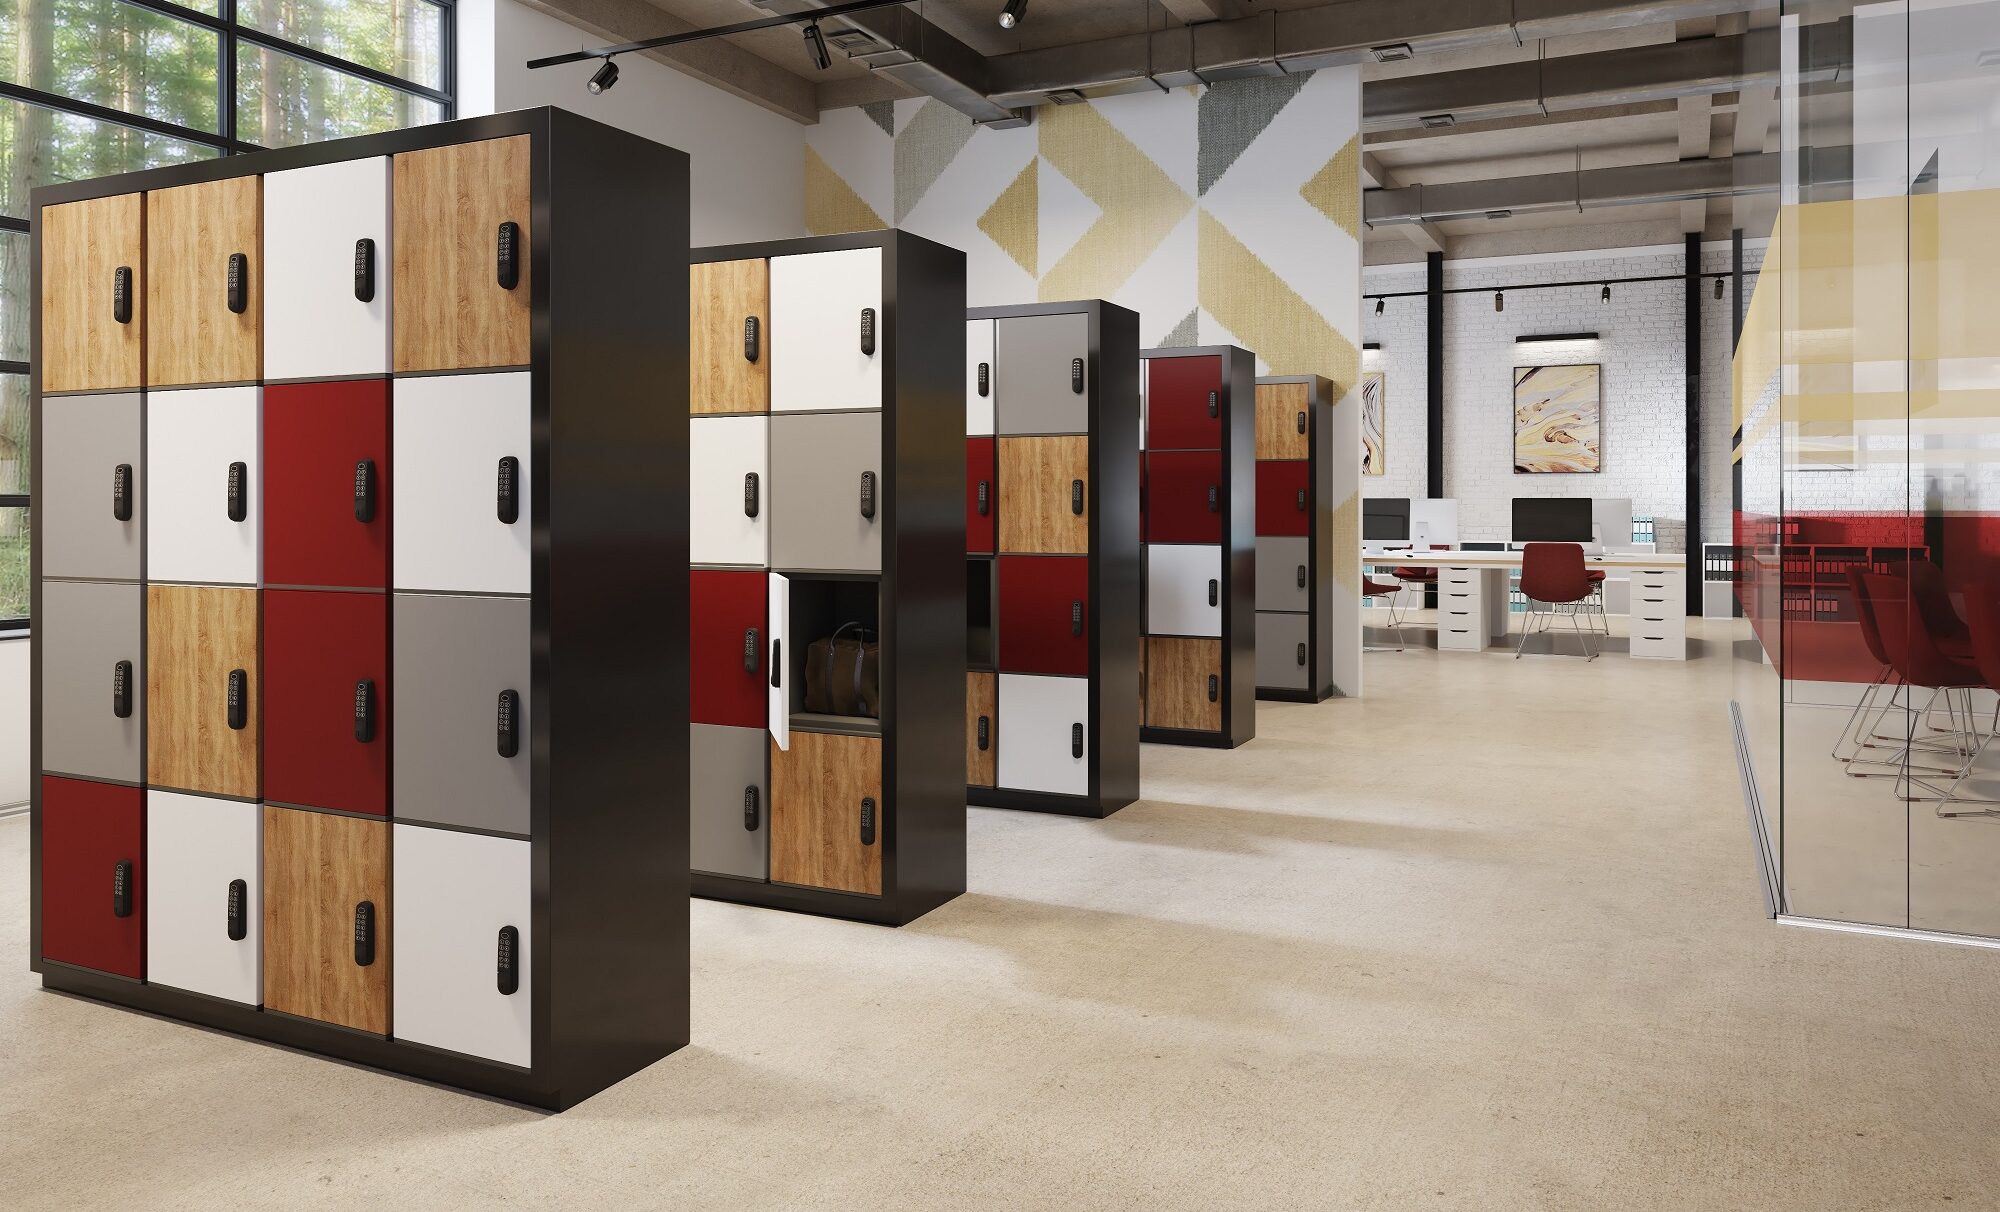 Smart lockers represent the future of employee storage. Read our new blog now to find out more.